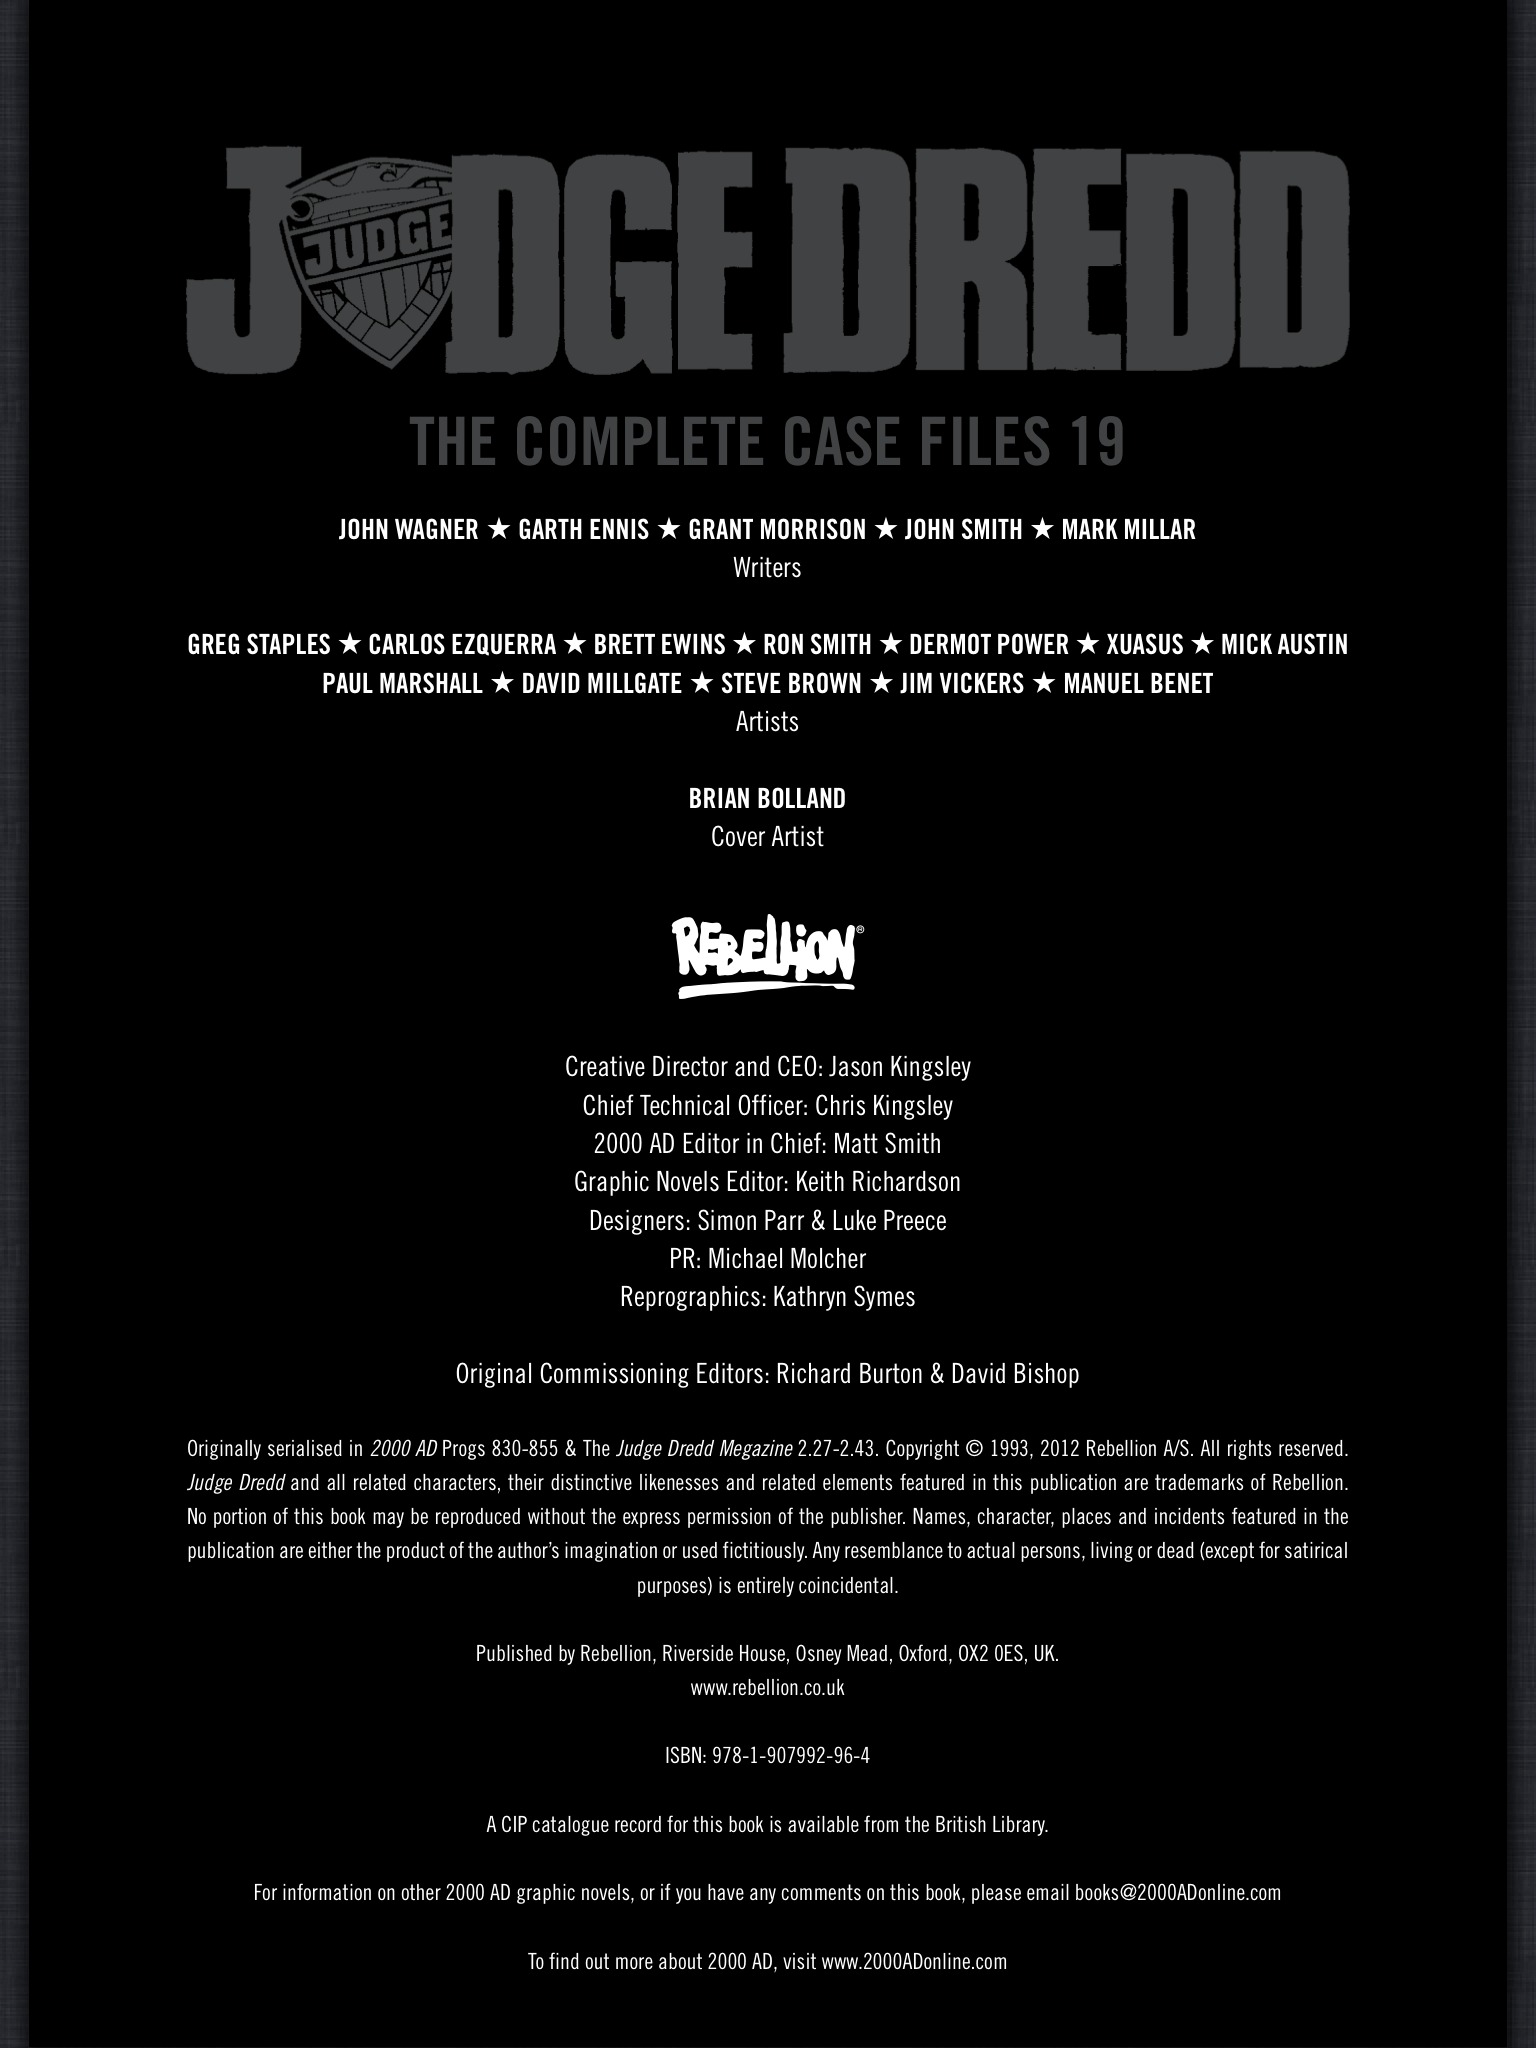 Read online Judge Dredd: The Complete Case Files comic -  Issue # TPB 19 - 2